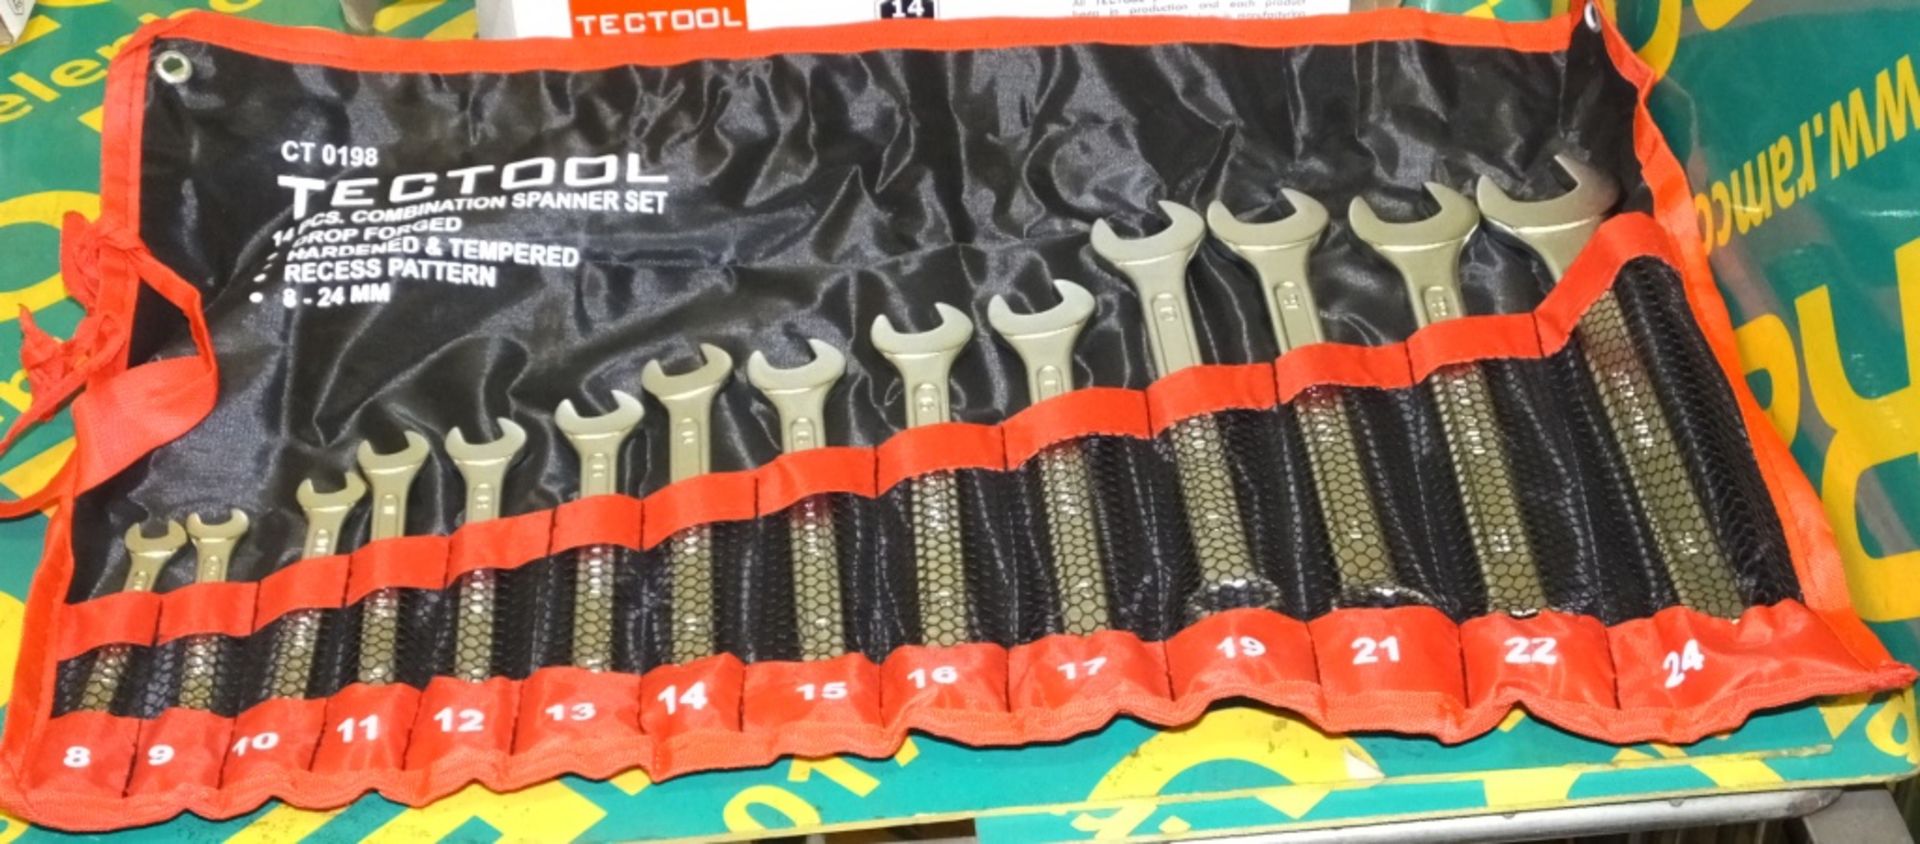 2x Tectool 14 piece combined spanner sets CT0198 - Image 2 of 2